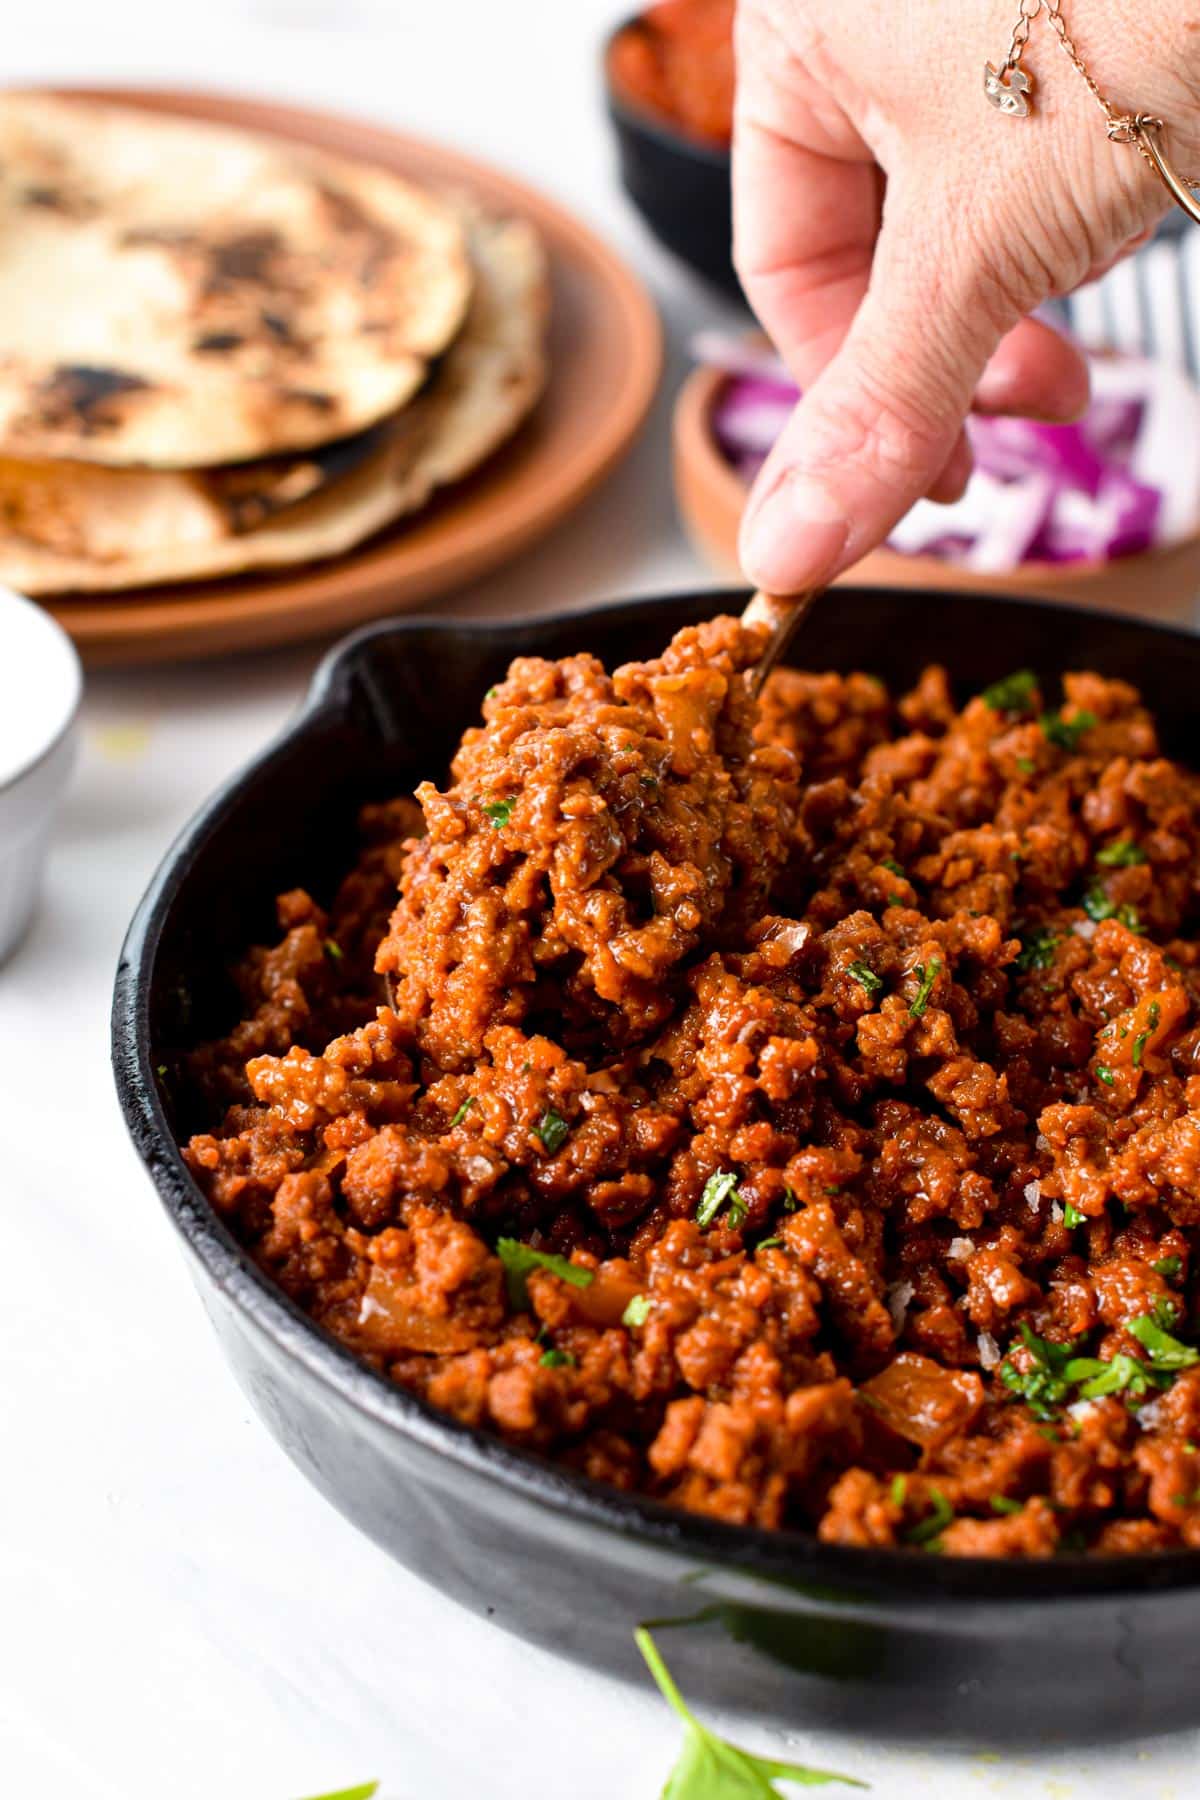 This TVP Taco Meat recipe is a delicious meat-free alternative for taco nights ready in 15 minutes. Bonus, textured soy proteins are not very expensive so it's a great low cost, high-protein vegan meal.